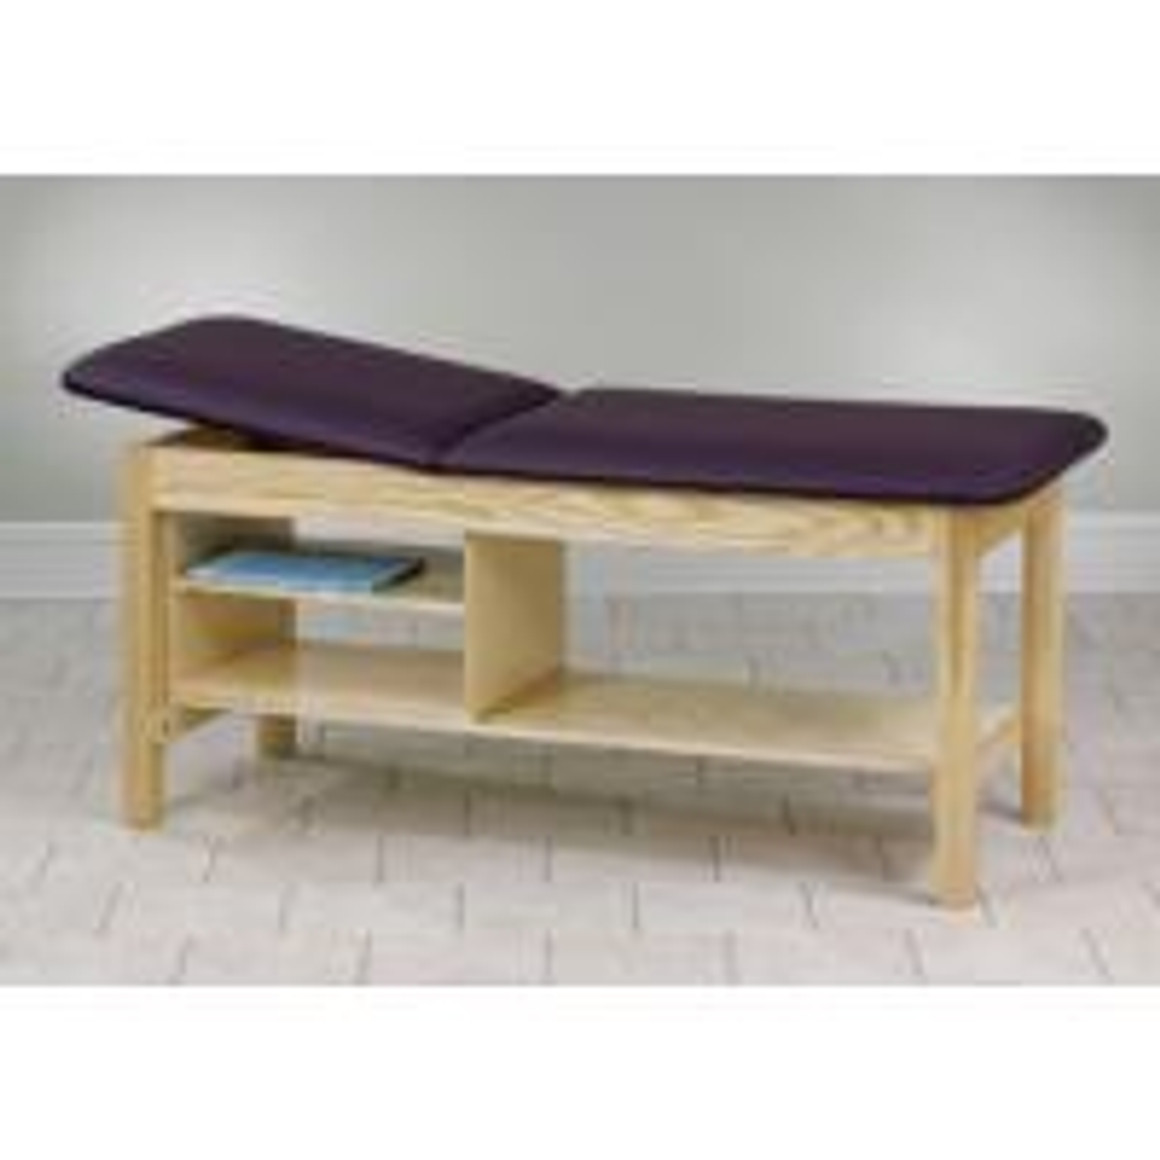 Clinton Classic Series Straight Line Treatment Table with Shelving Unit, 30" Wide, Viscaya Palm